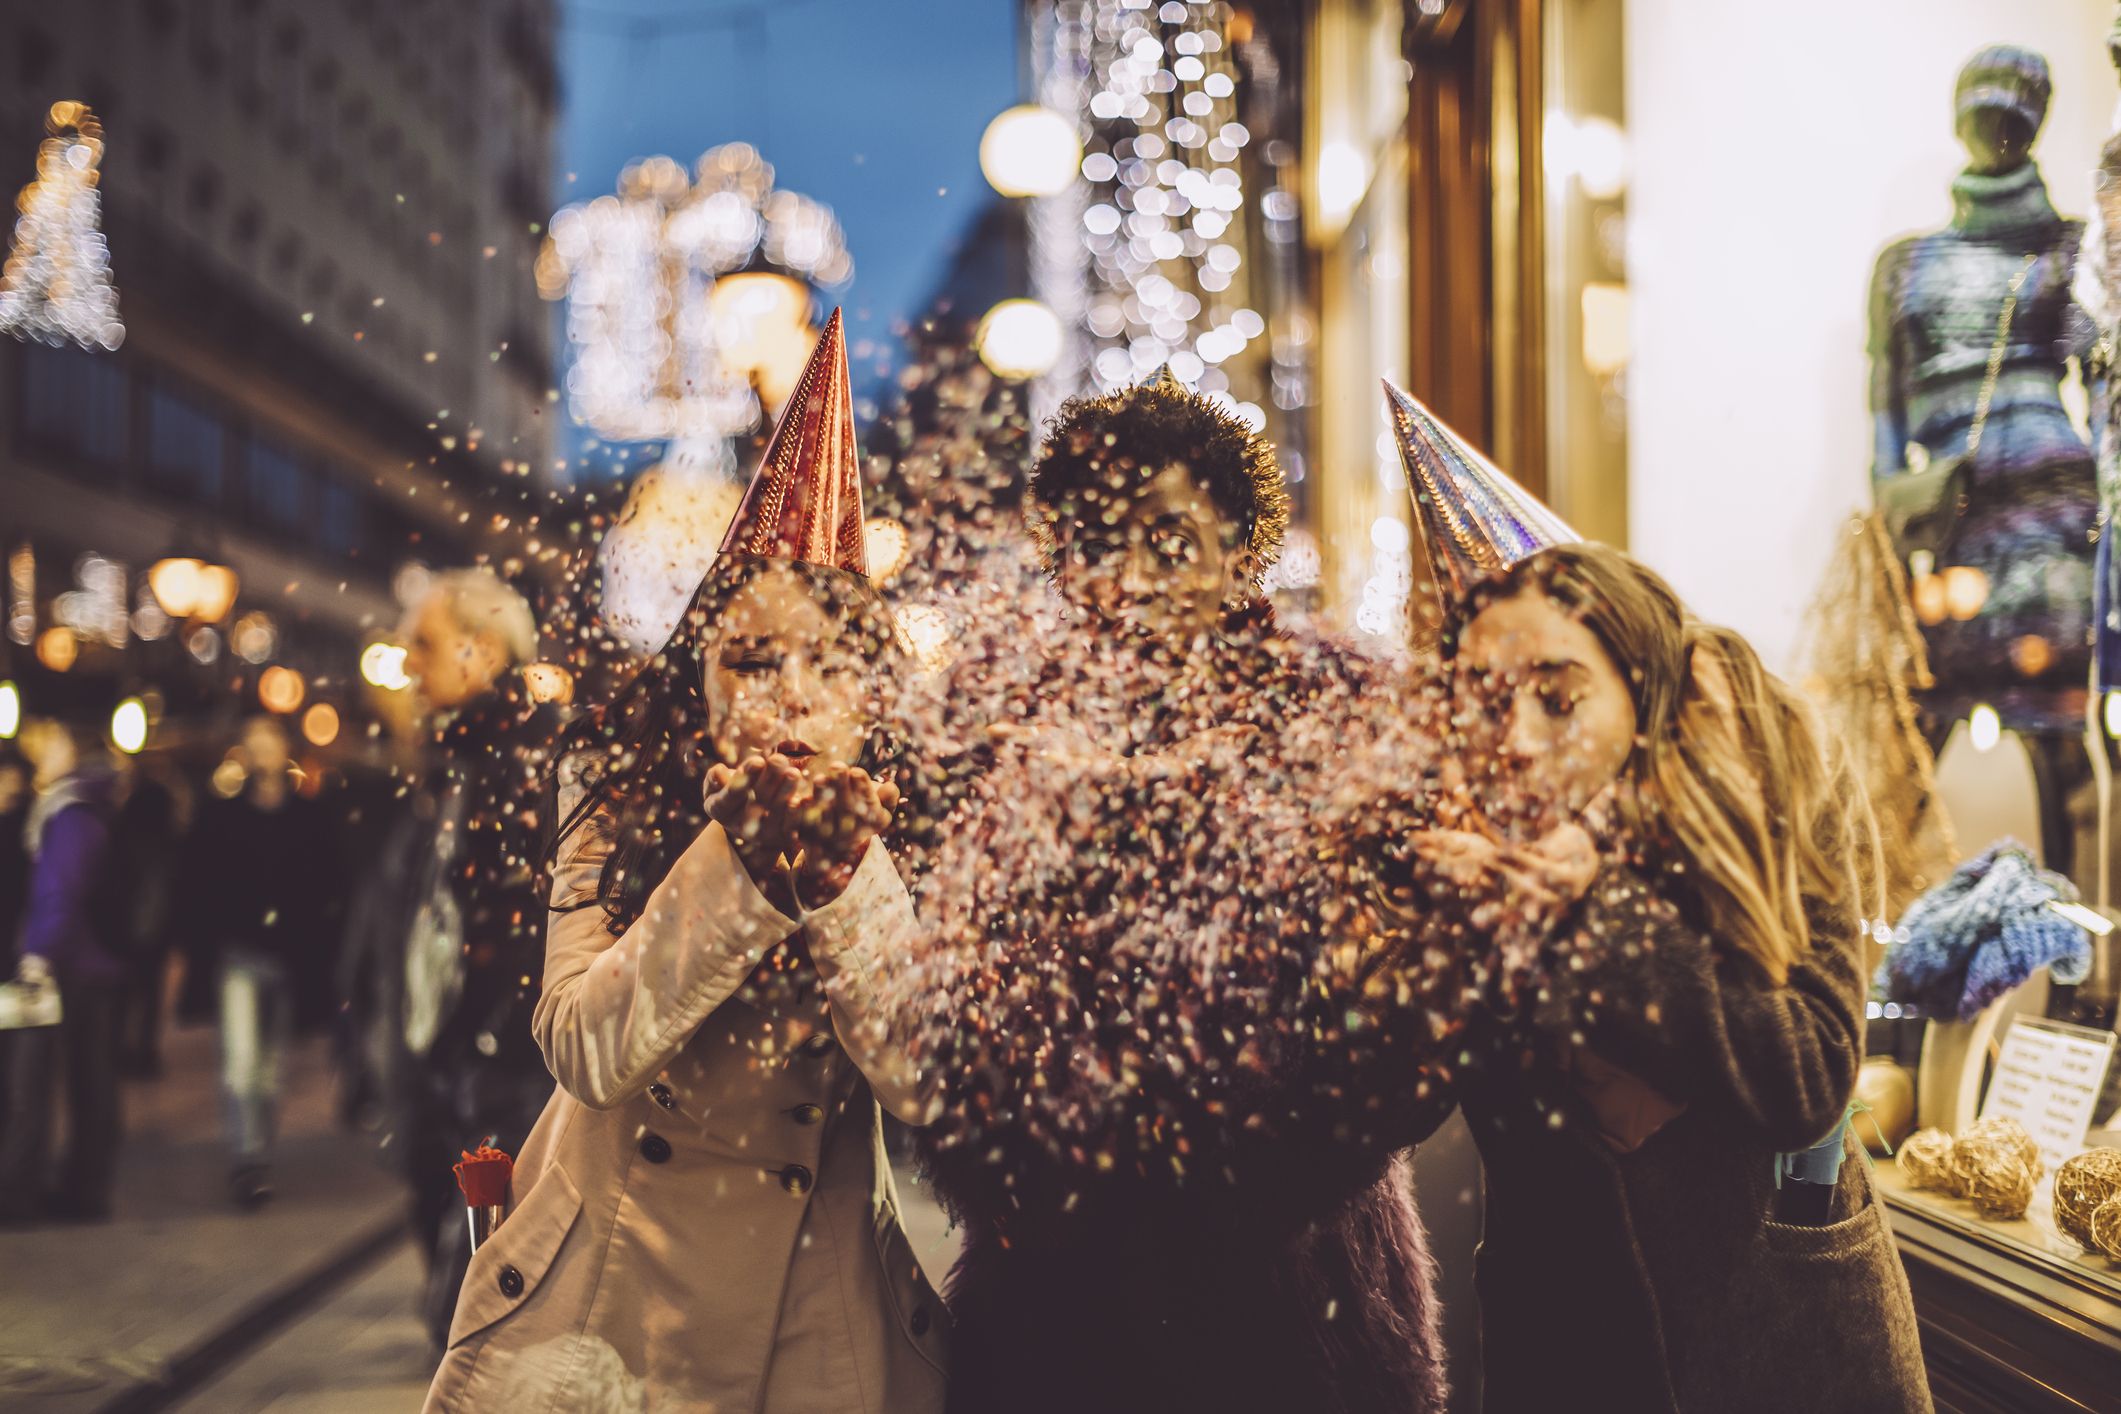 Bizarre New Year's Eve traditions that'll guarantee a great 2023